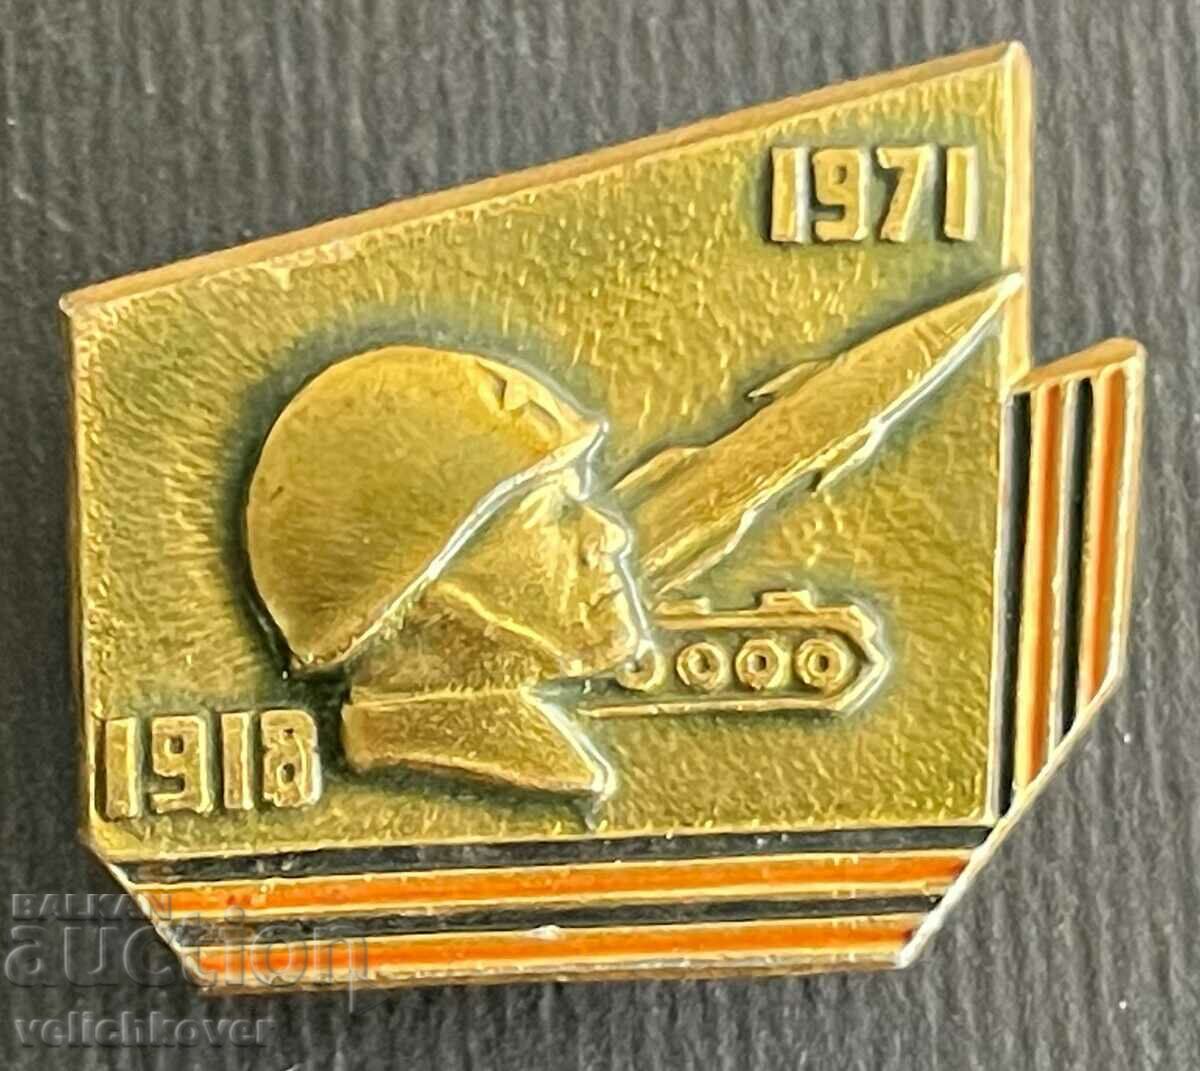 34714 USSR sign 63 years. Soviet Army 1918-1971.